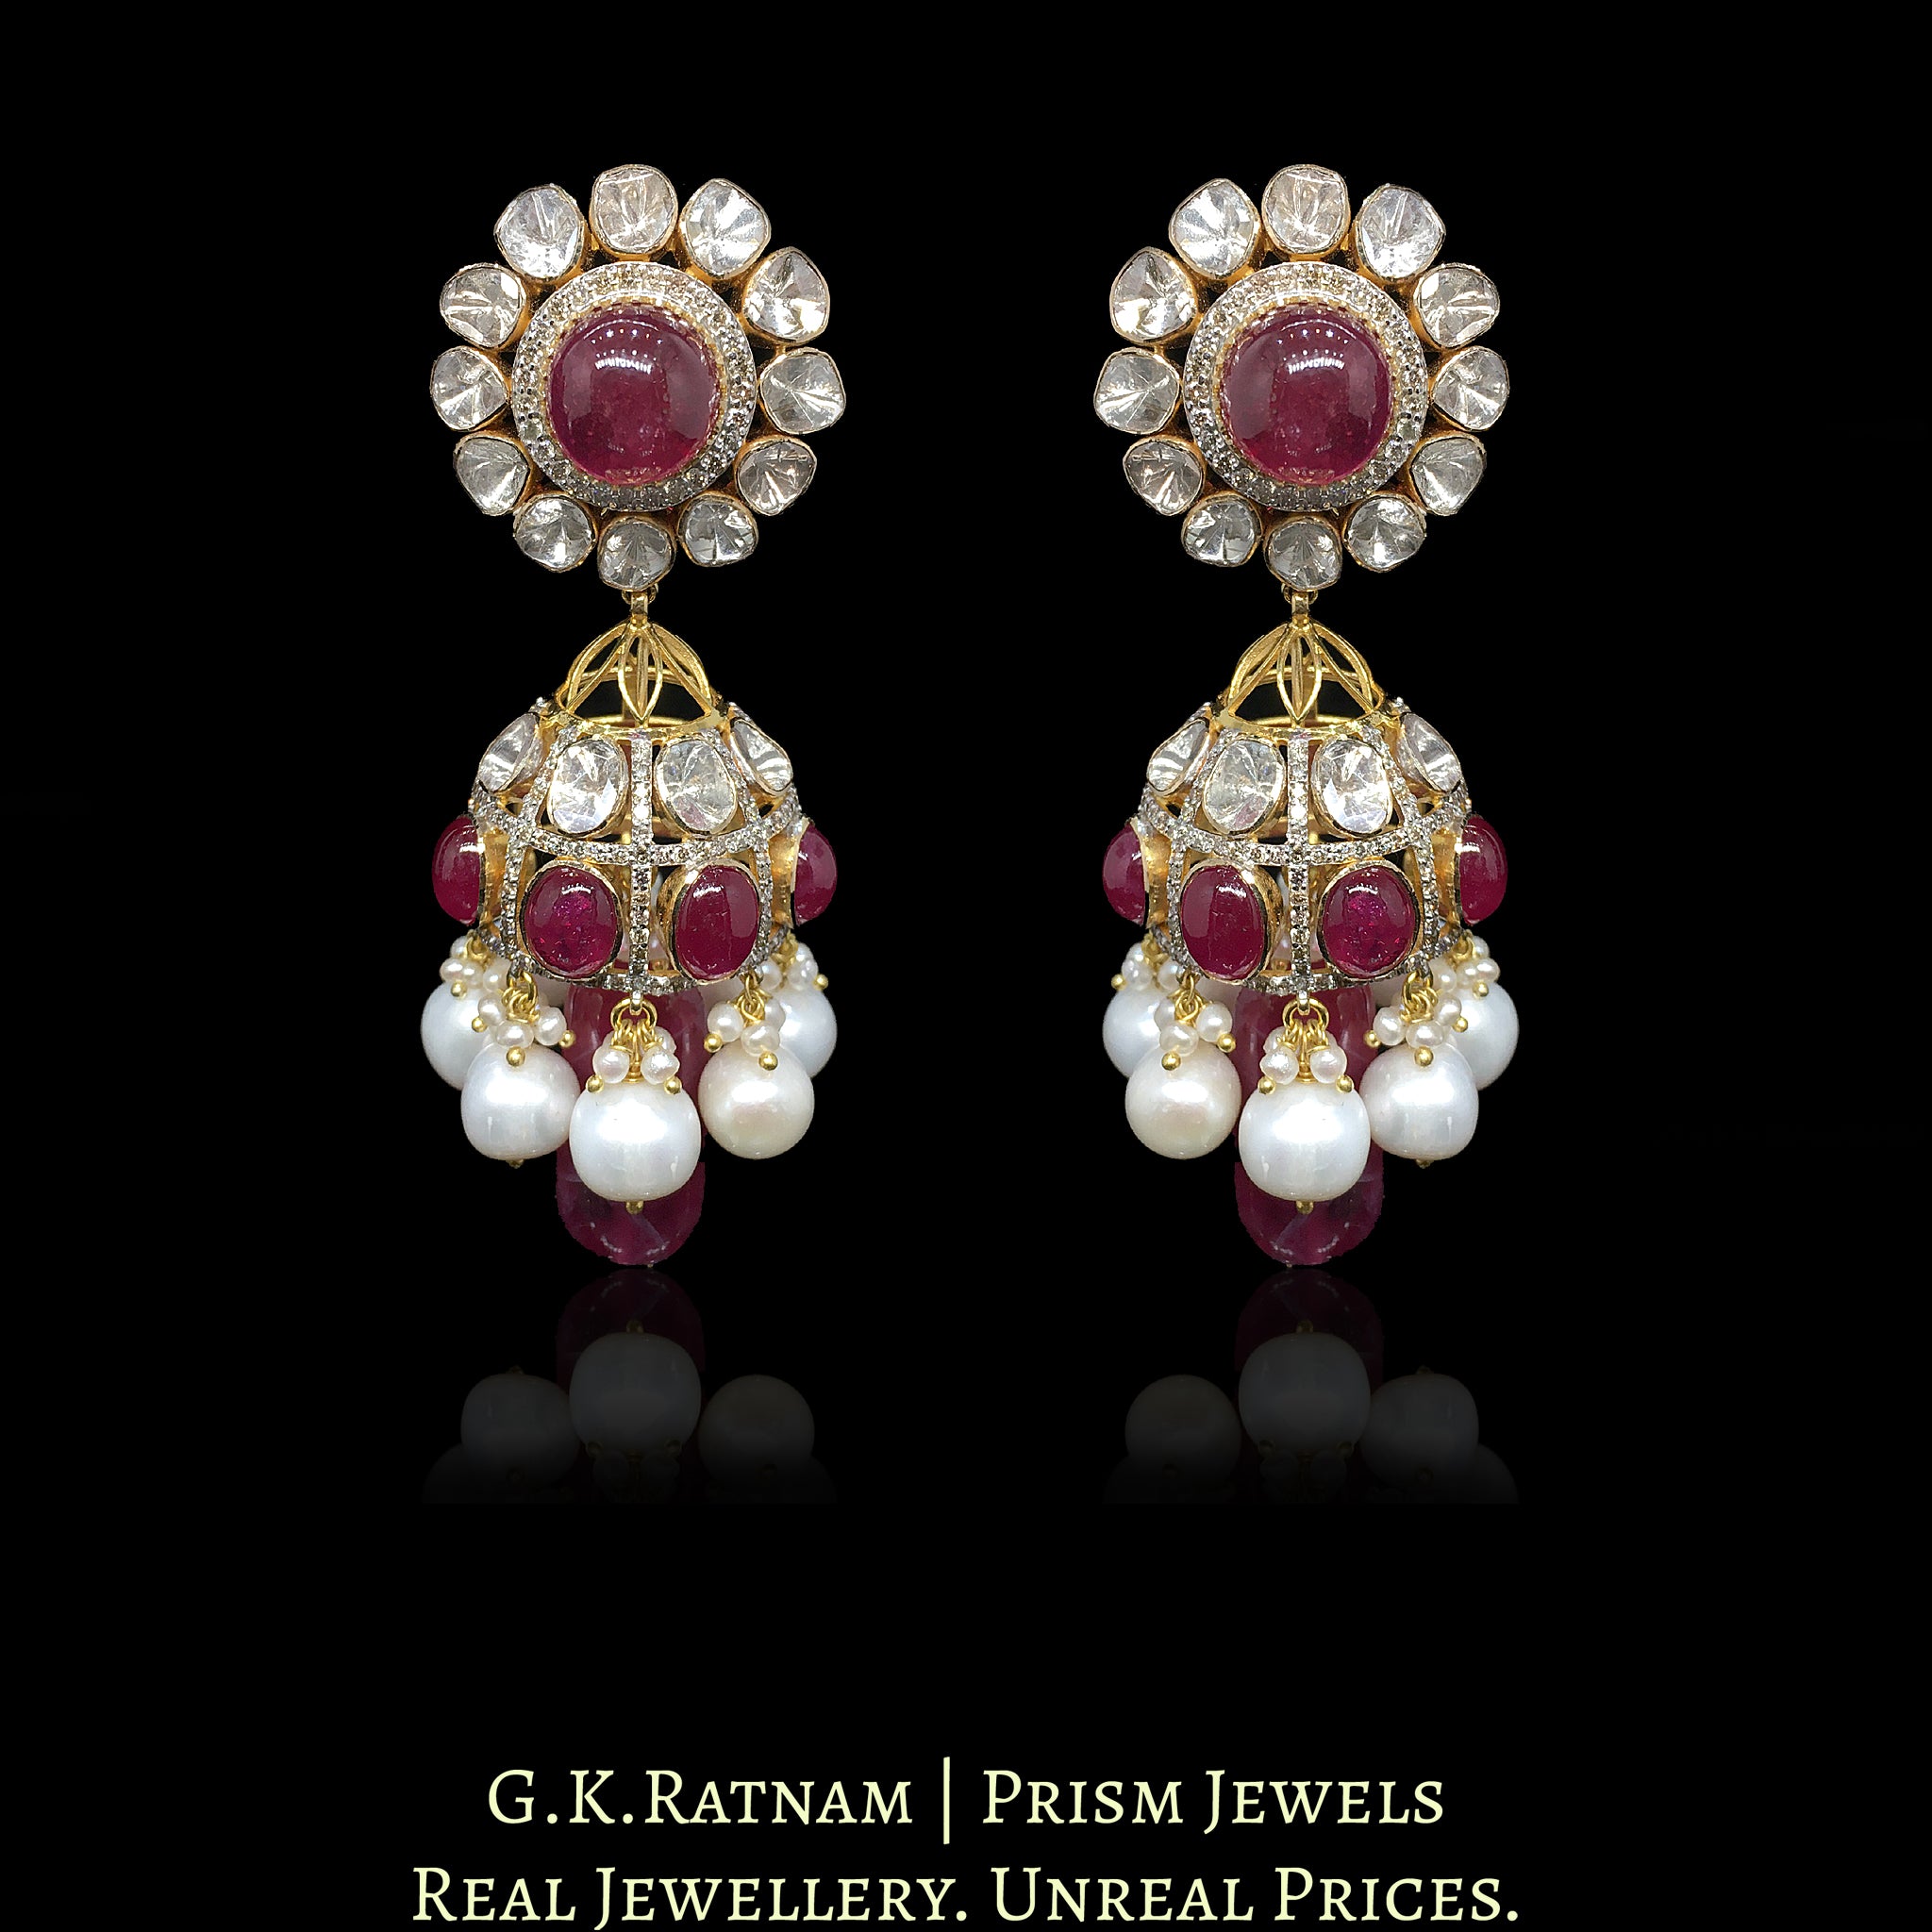 18k Gold and Diamond Polki Open Setting Jhumki Earring Pair with Rubies and Natural Freshwater Pearls